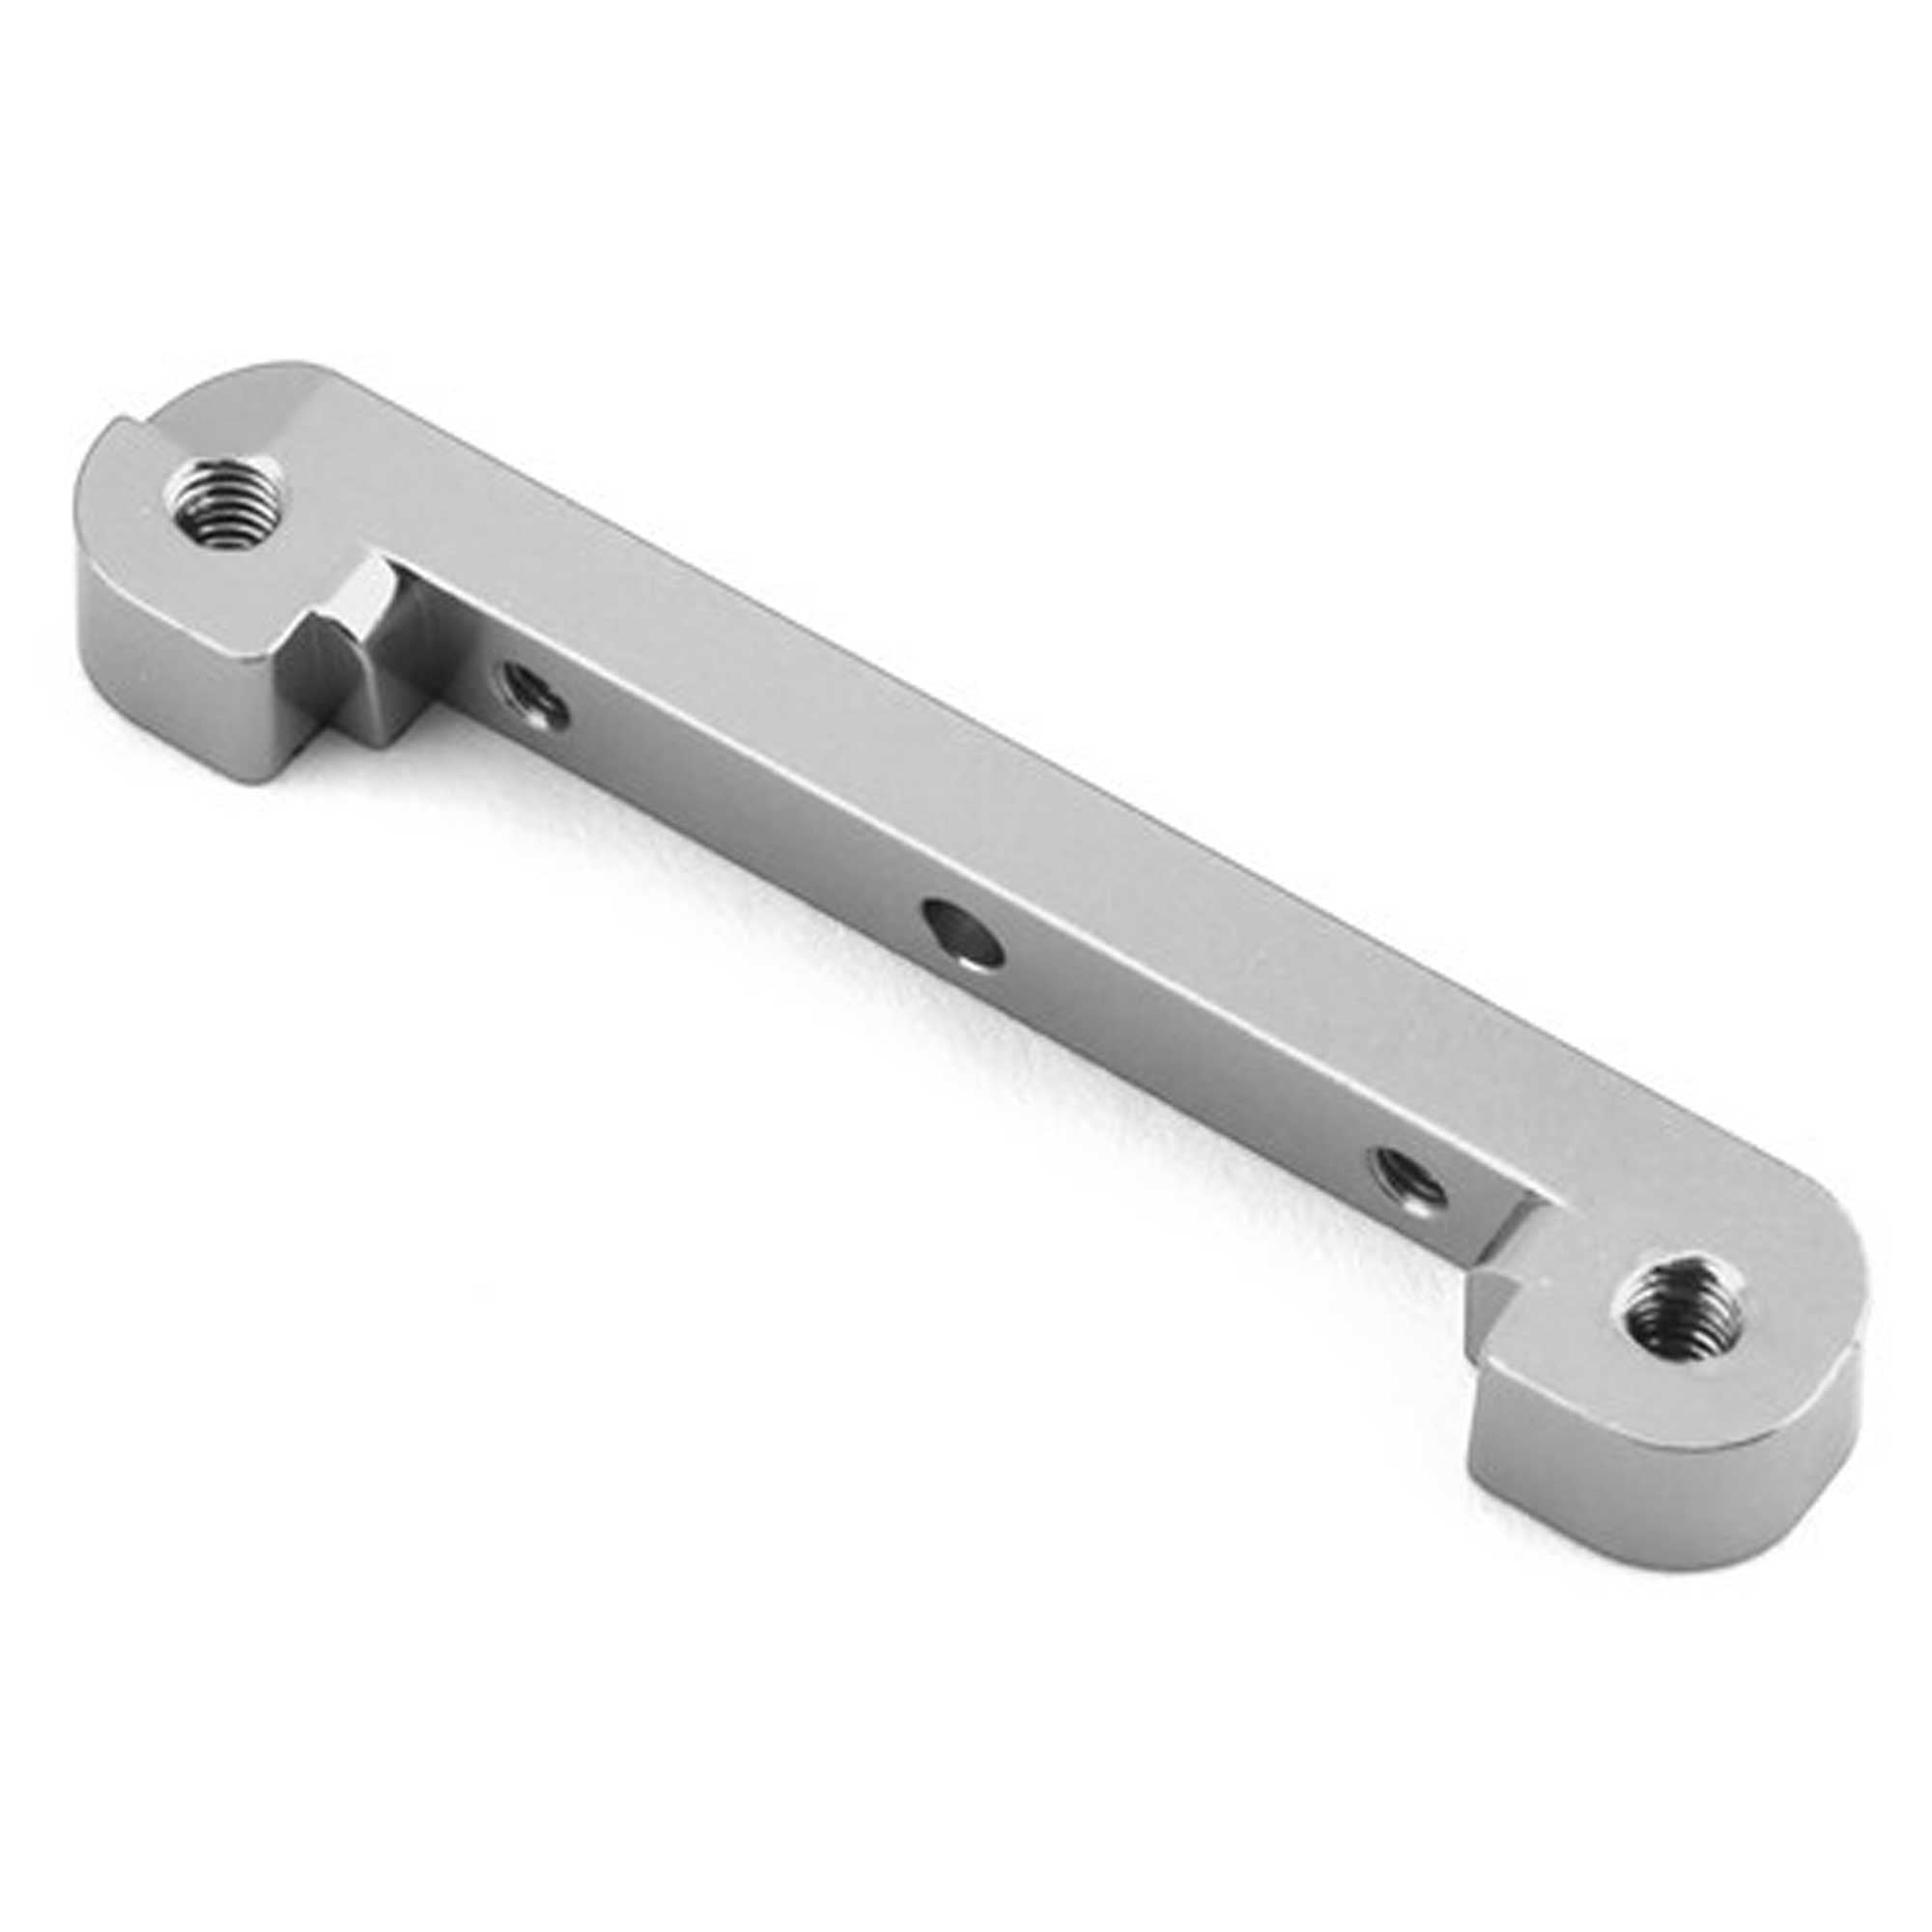 Silver Front Upper Suspension Block for Arrma Outcast 6S/Limitless/Infraction 